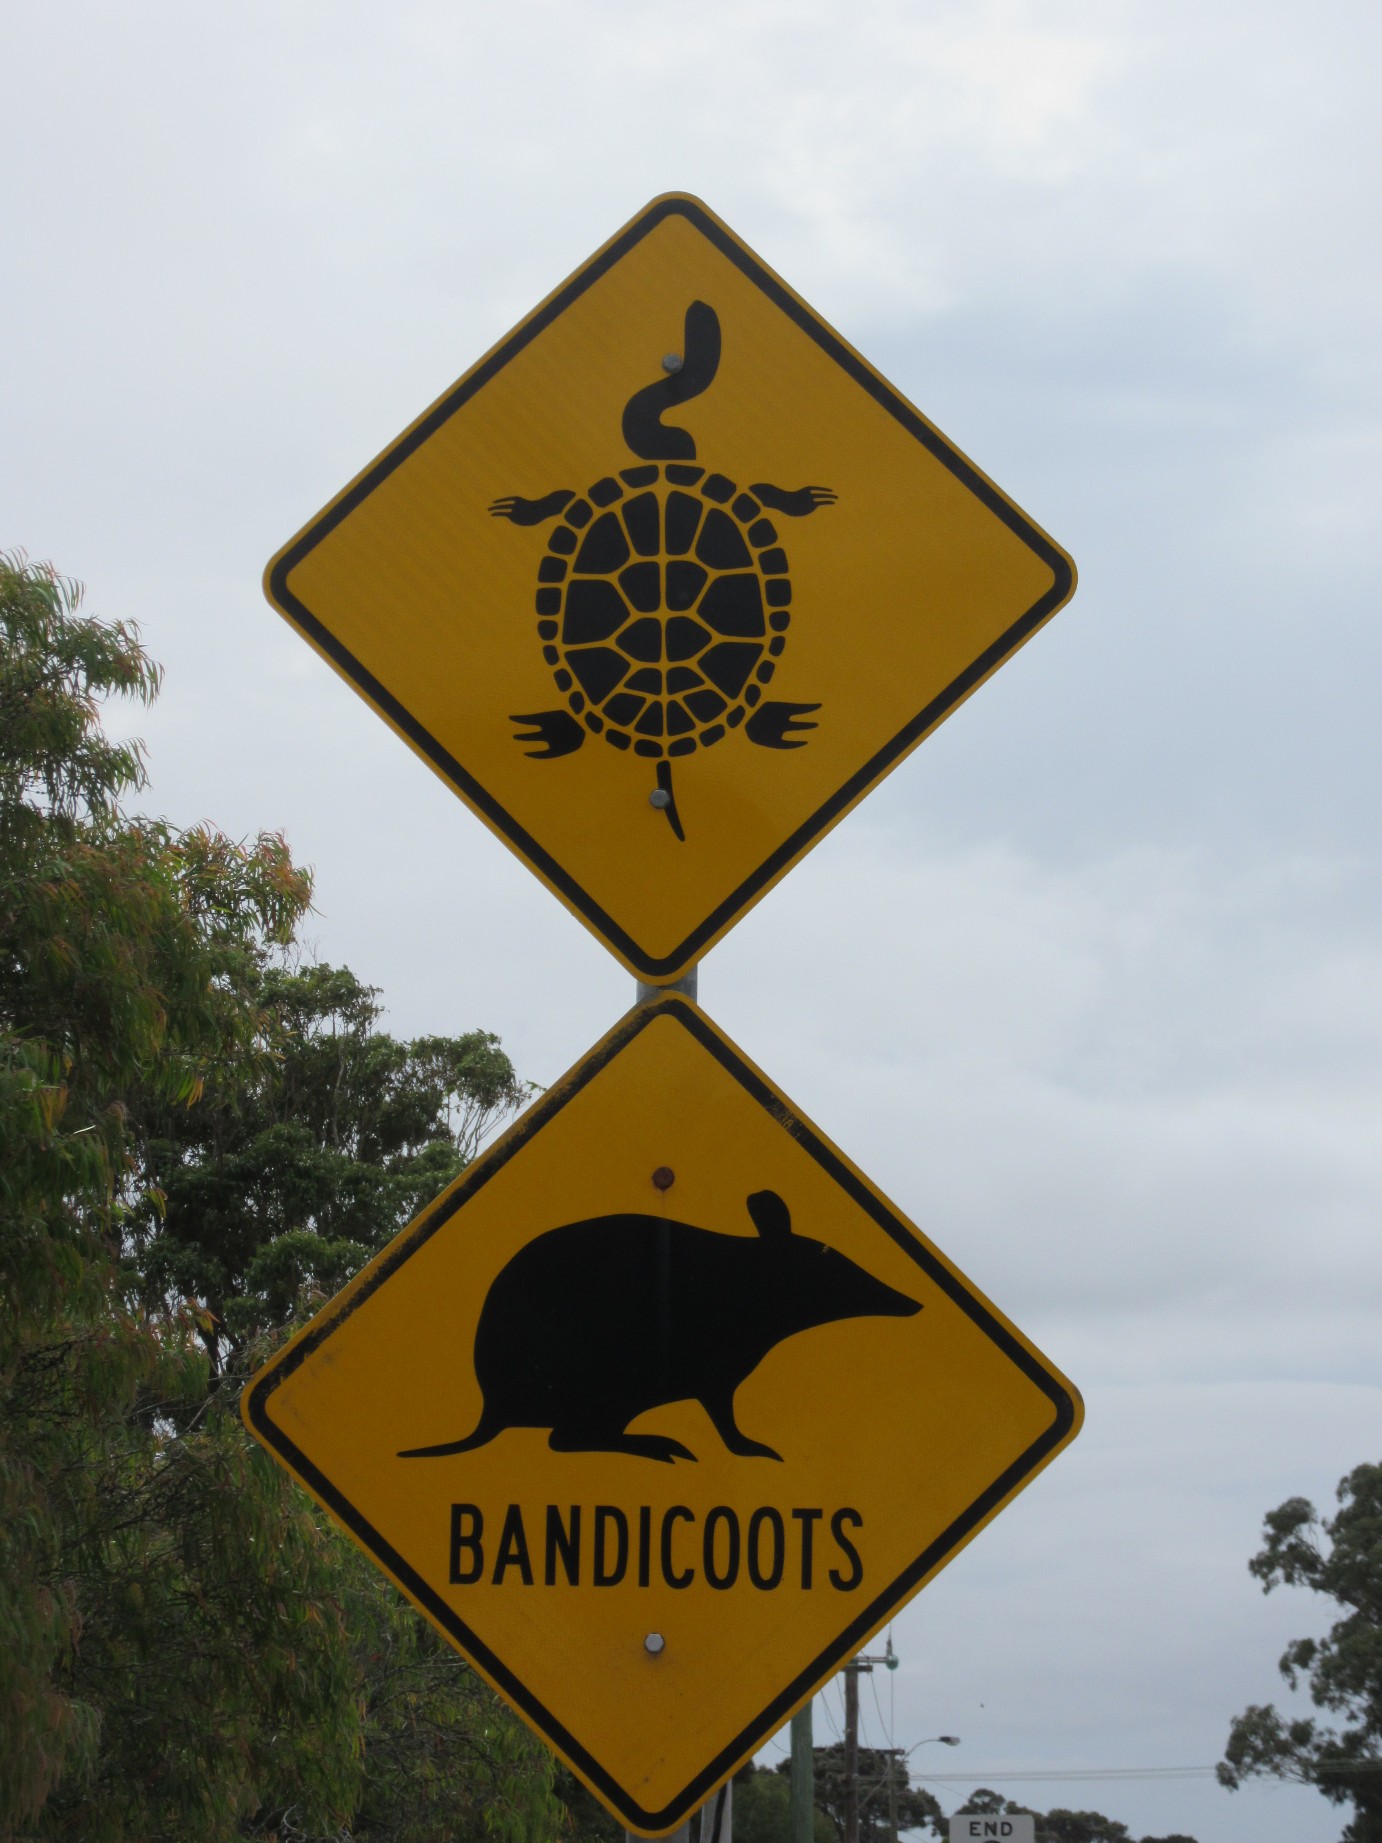 Watch out for bandicoots and wee turtles on the road